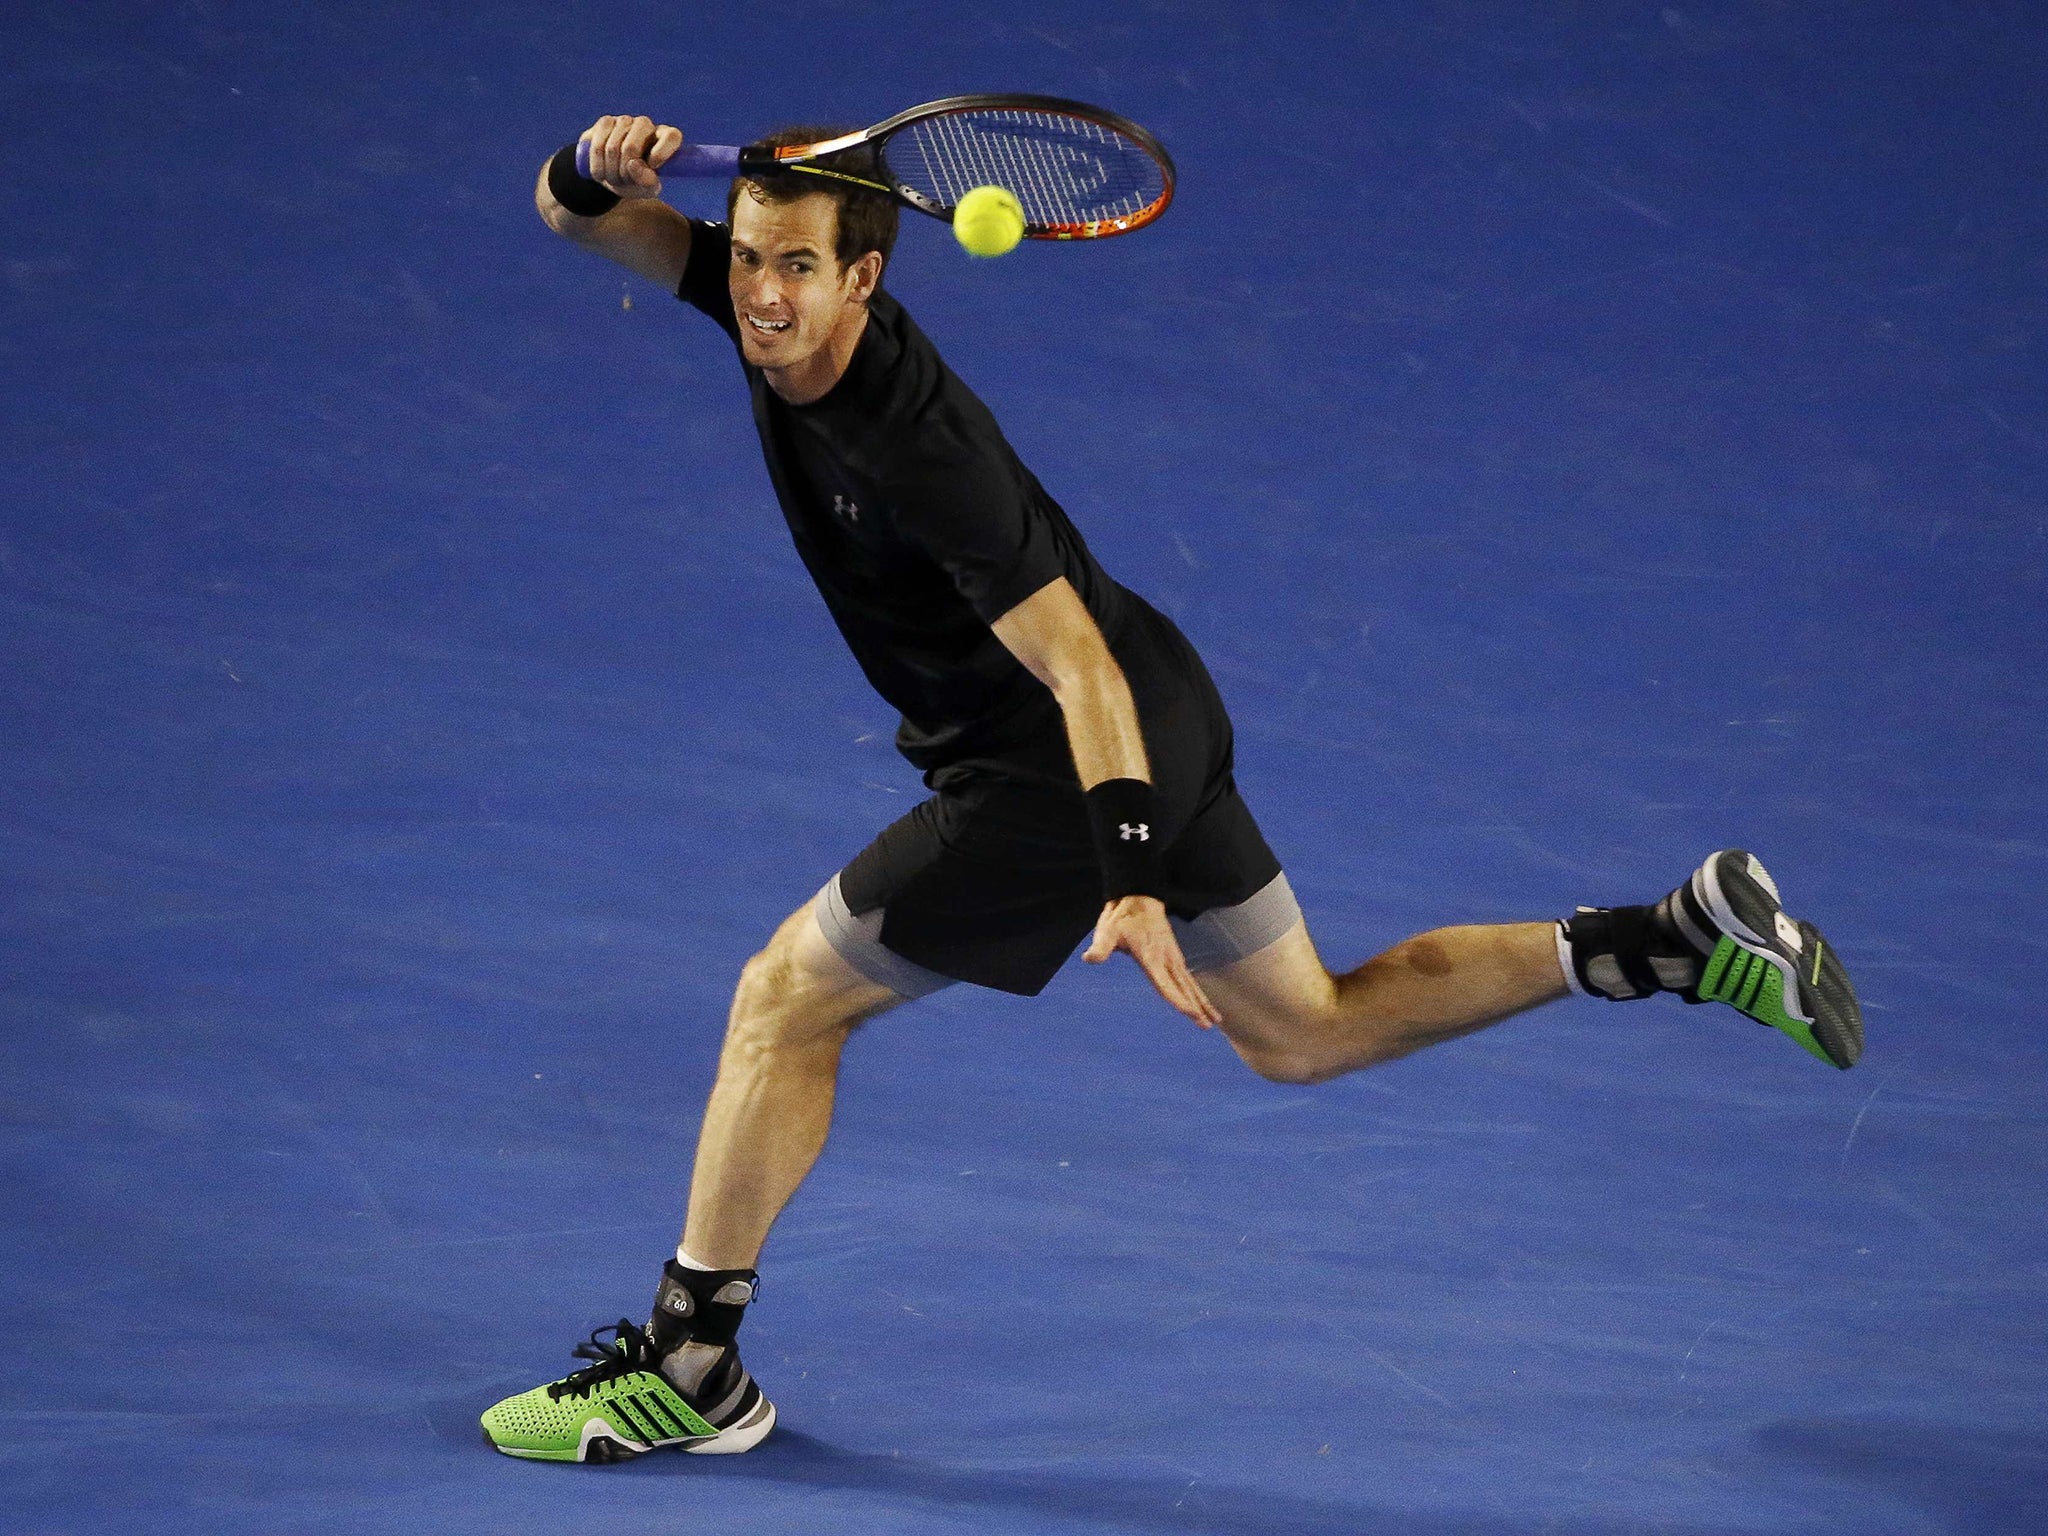 Andy Murray unleashes a forehand during his impressive victory over Tomas Berdych in Melbourne yesterday